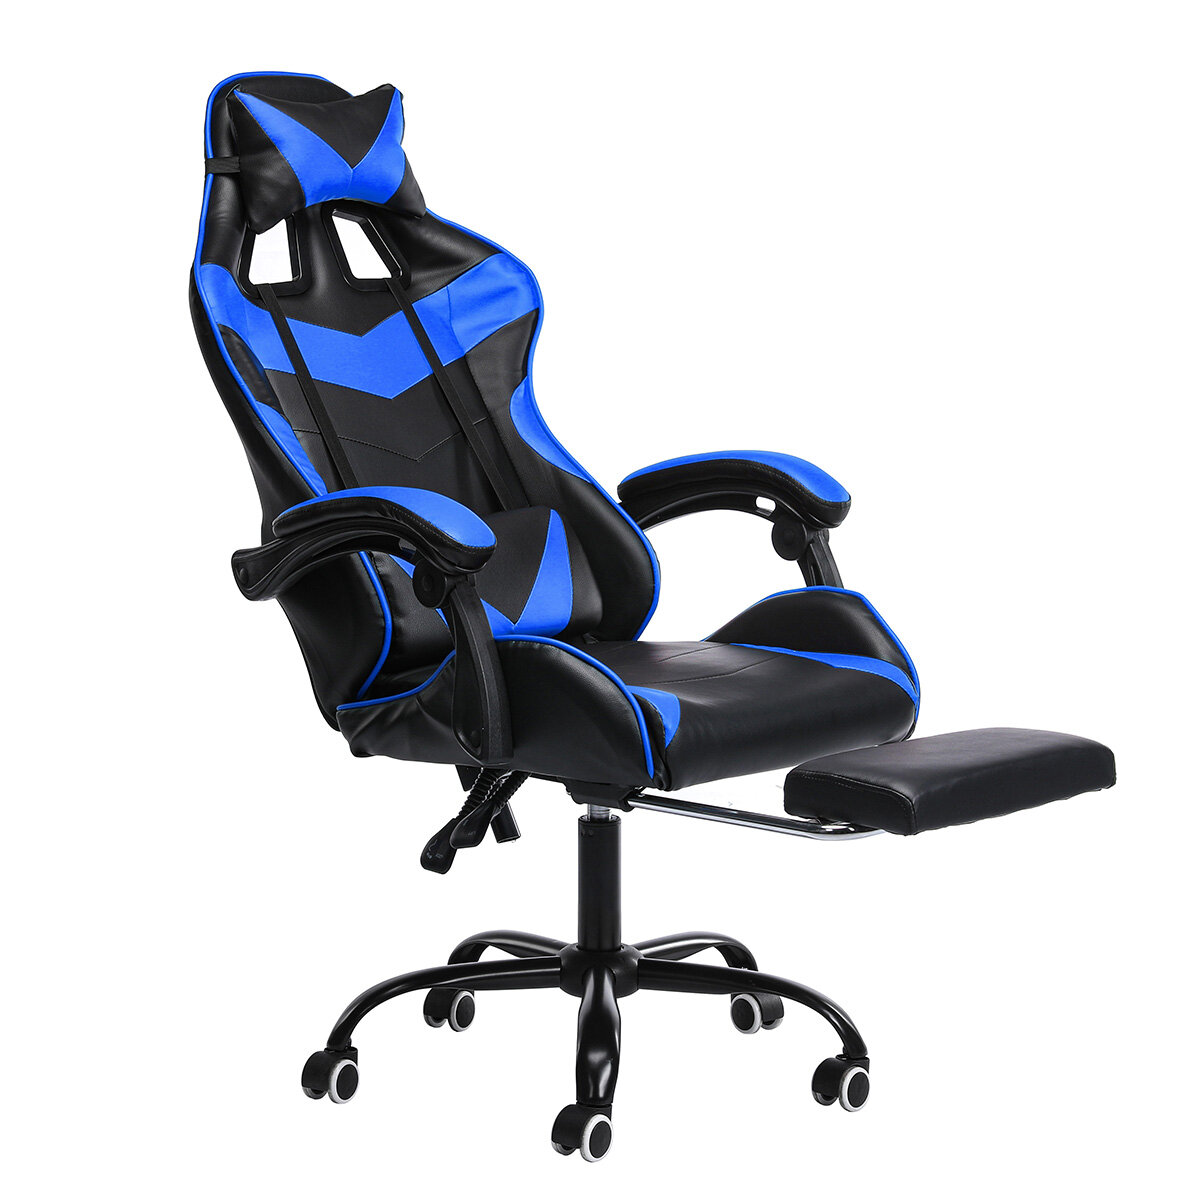 Image of Hoffree Ergonomic High Back Racing Chair Reclining Office Chair Adjustable Height Rotating Lift Chair PU Leather Gaming